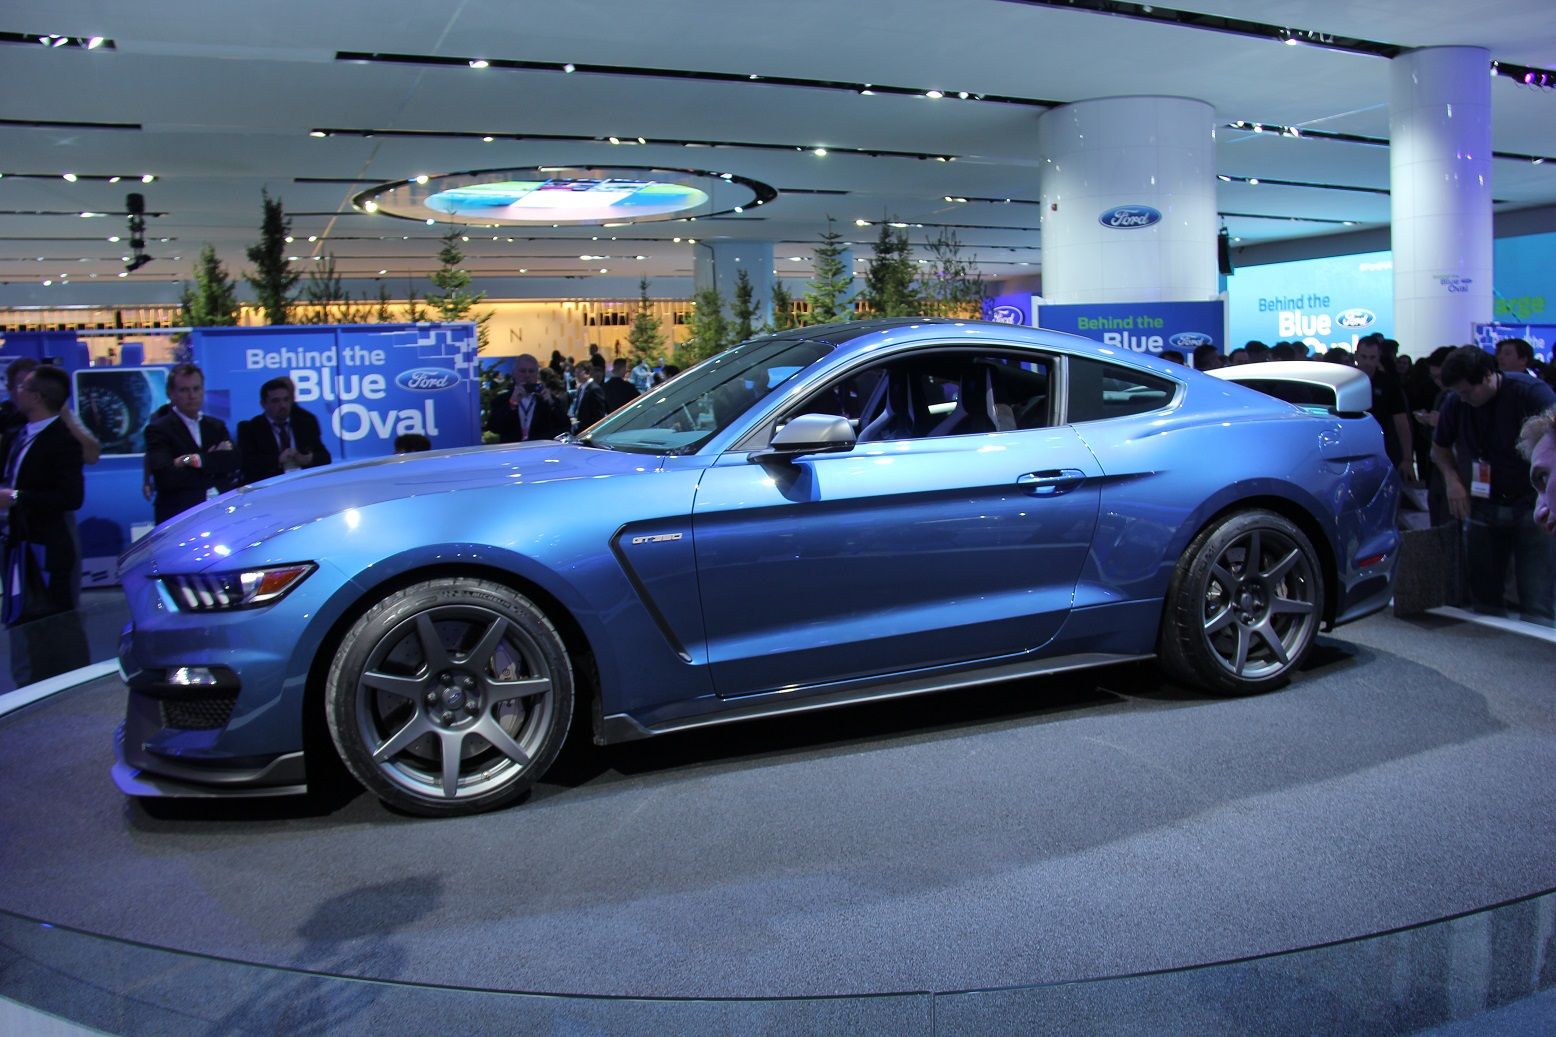 2016 Ford Mustang Shelby Gt350r Side Profile (View 4 of 47)